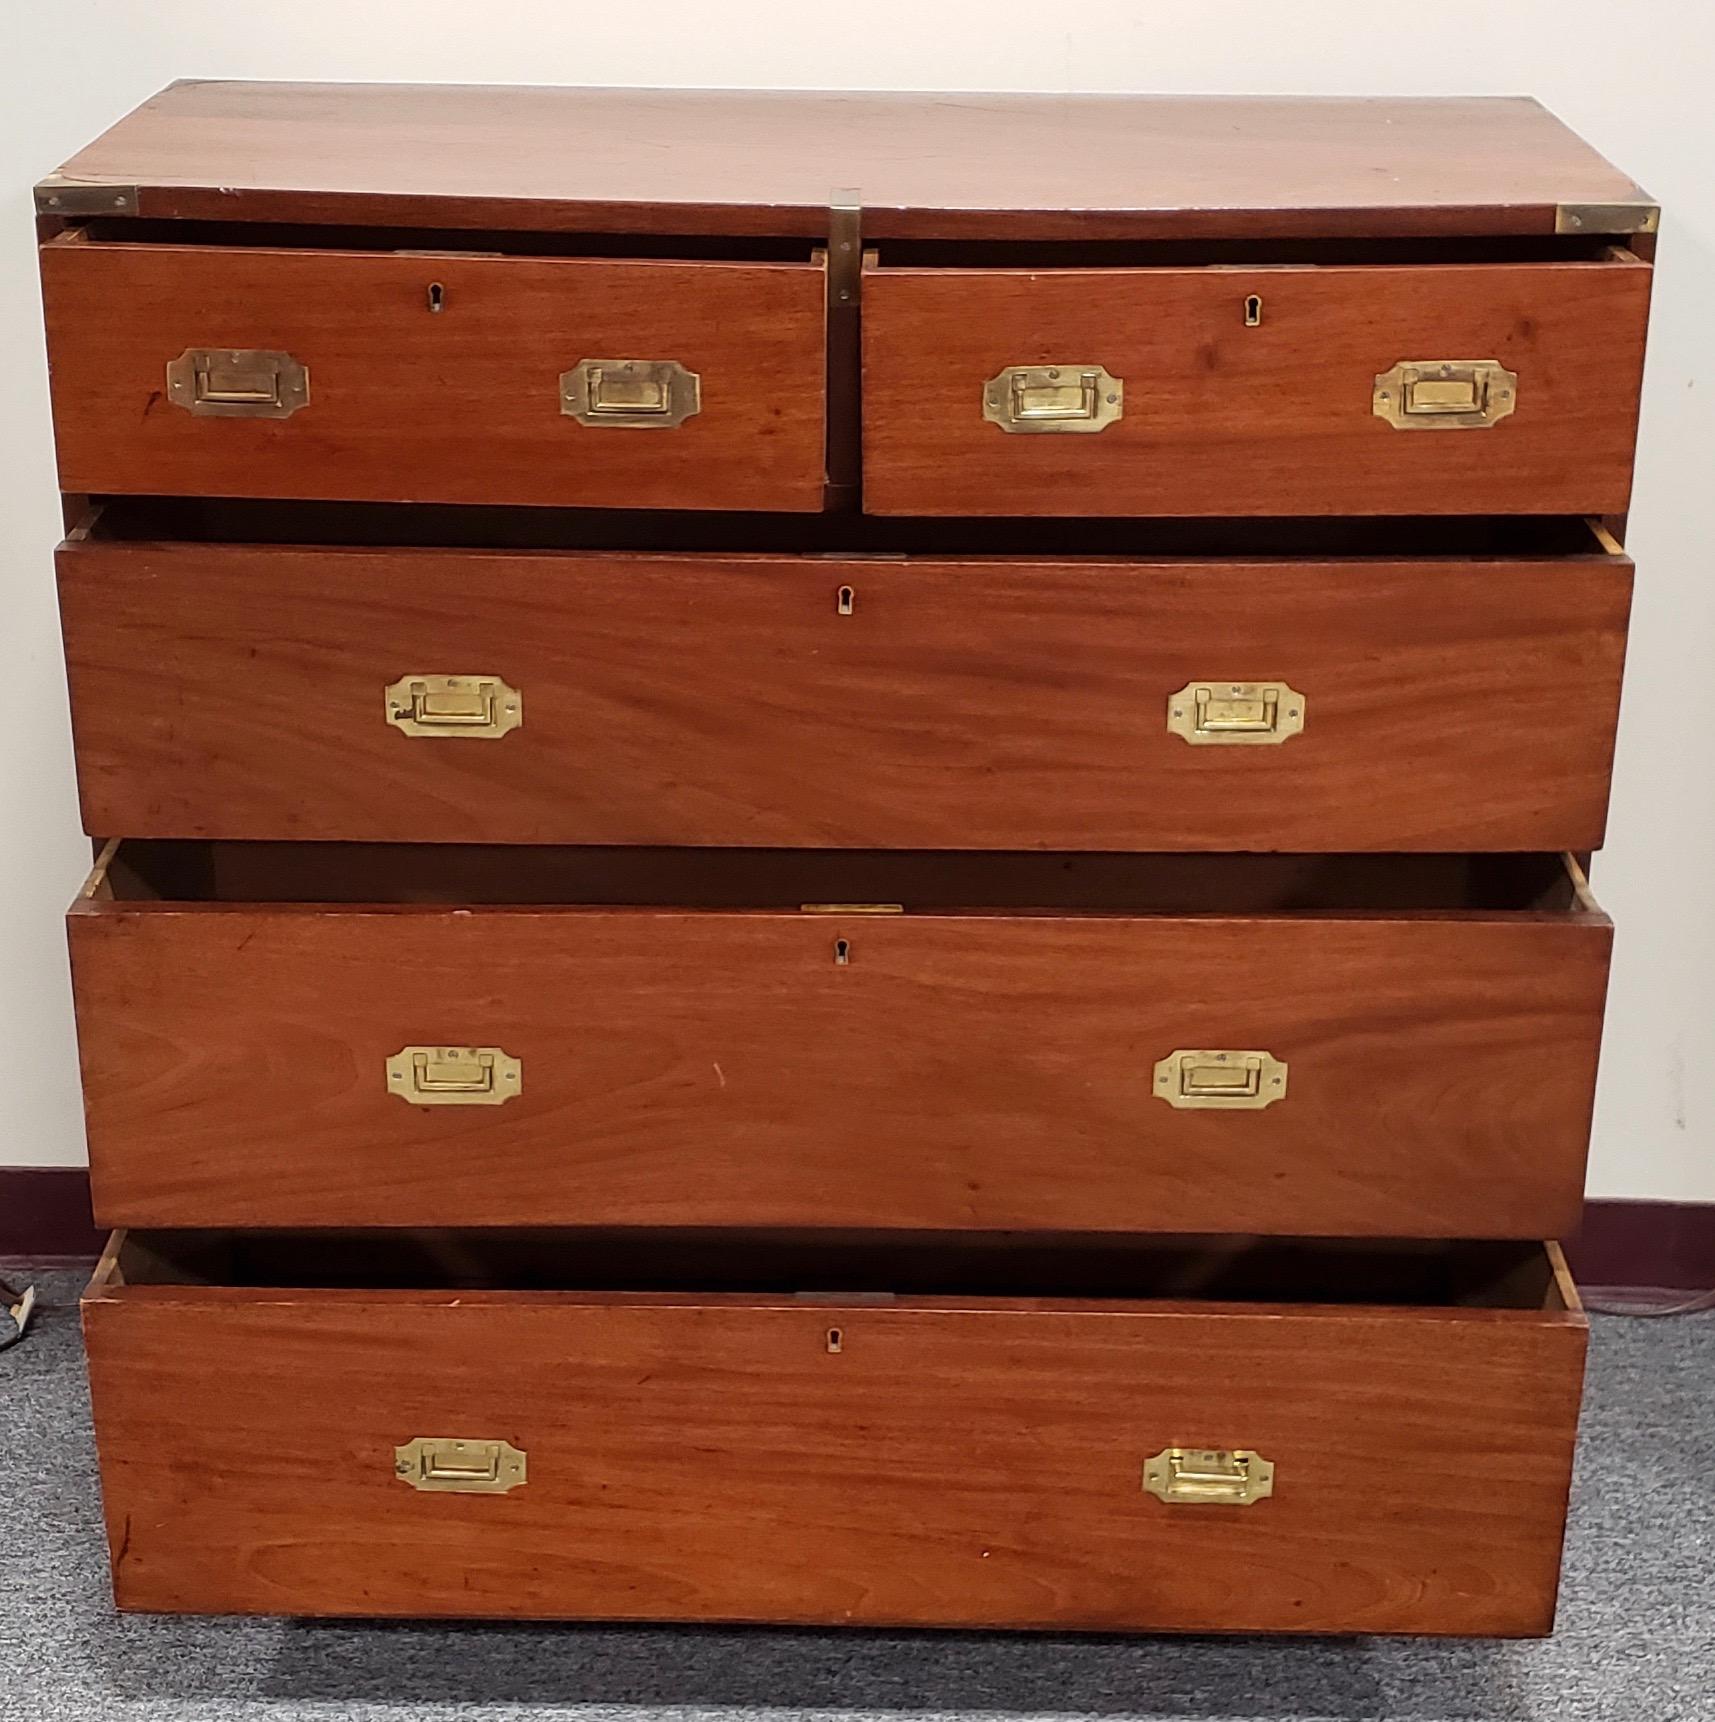 Hand-Crafted 19th Century Solid Mahogany Campaign Chest by P. Beakey